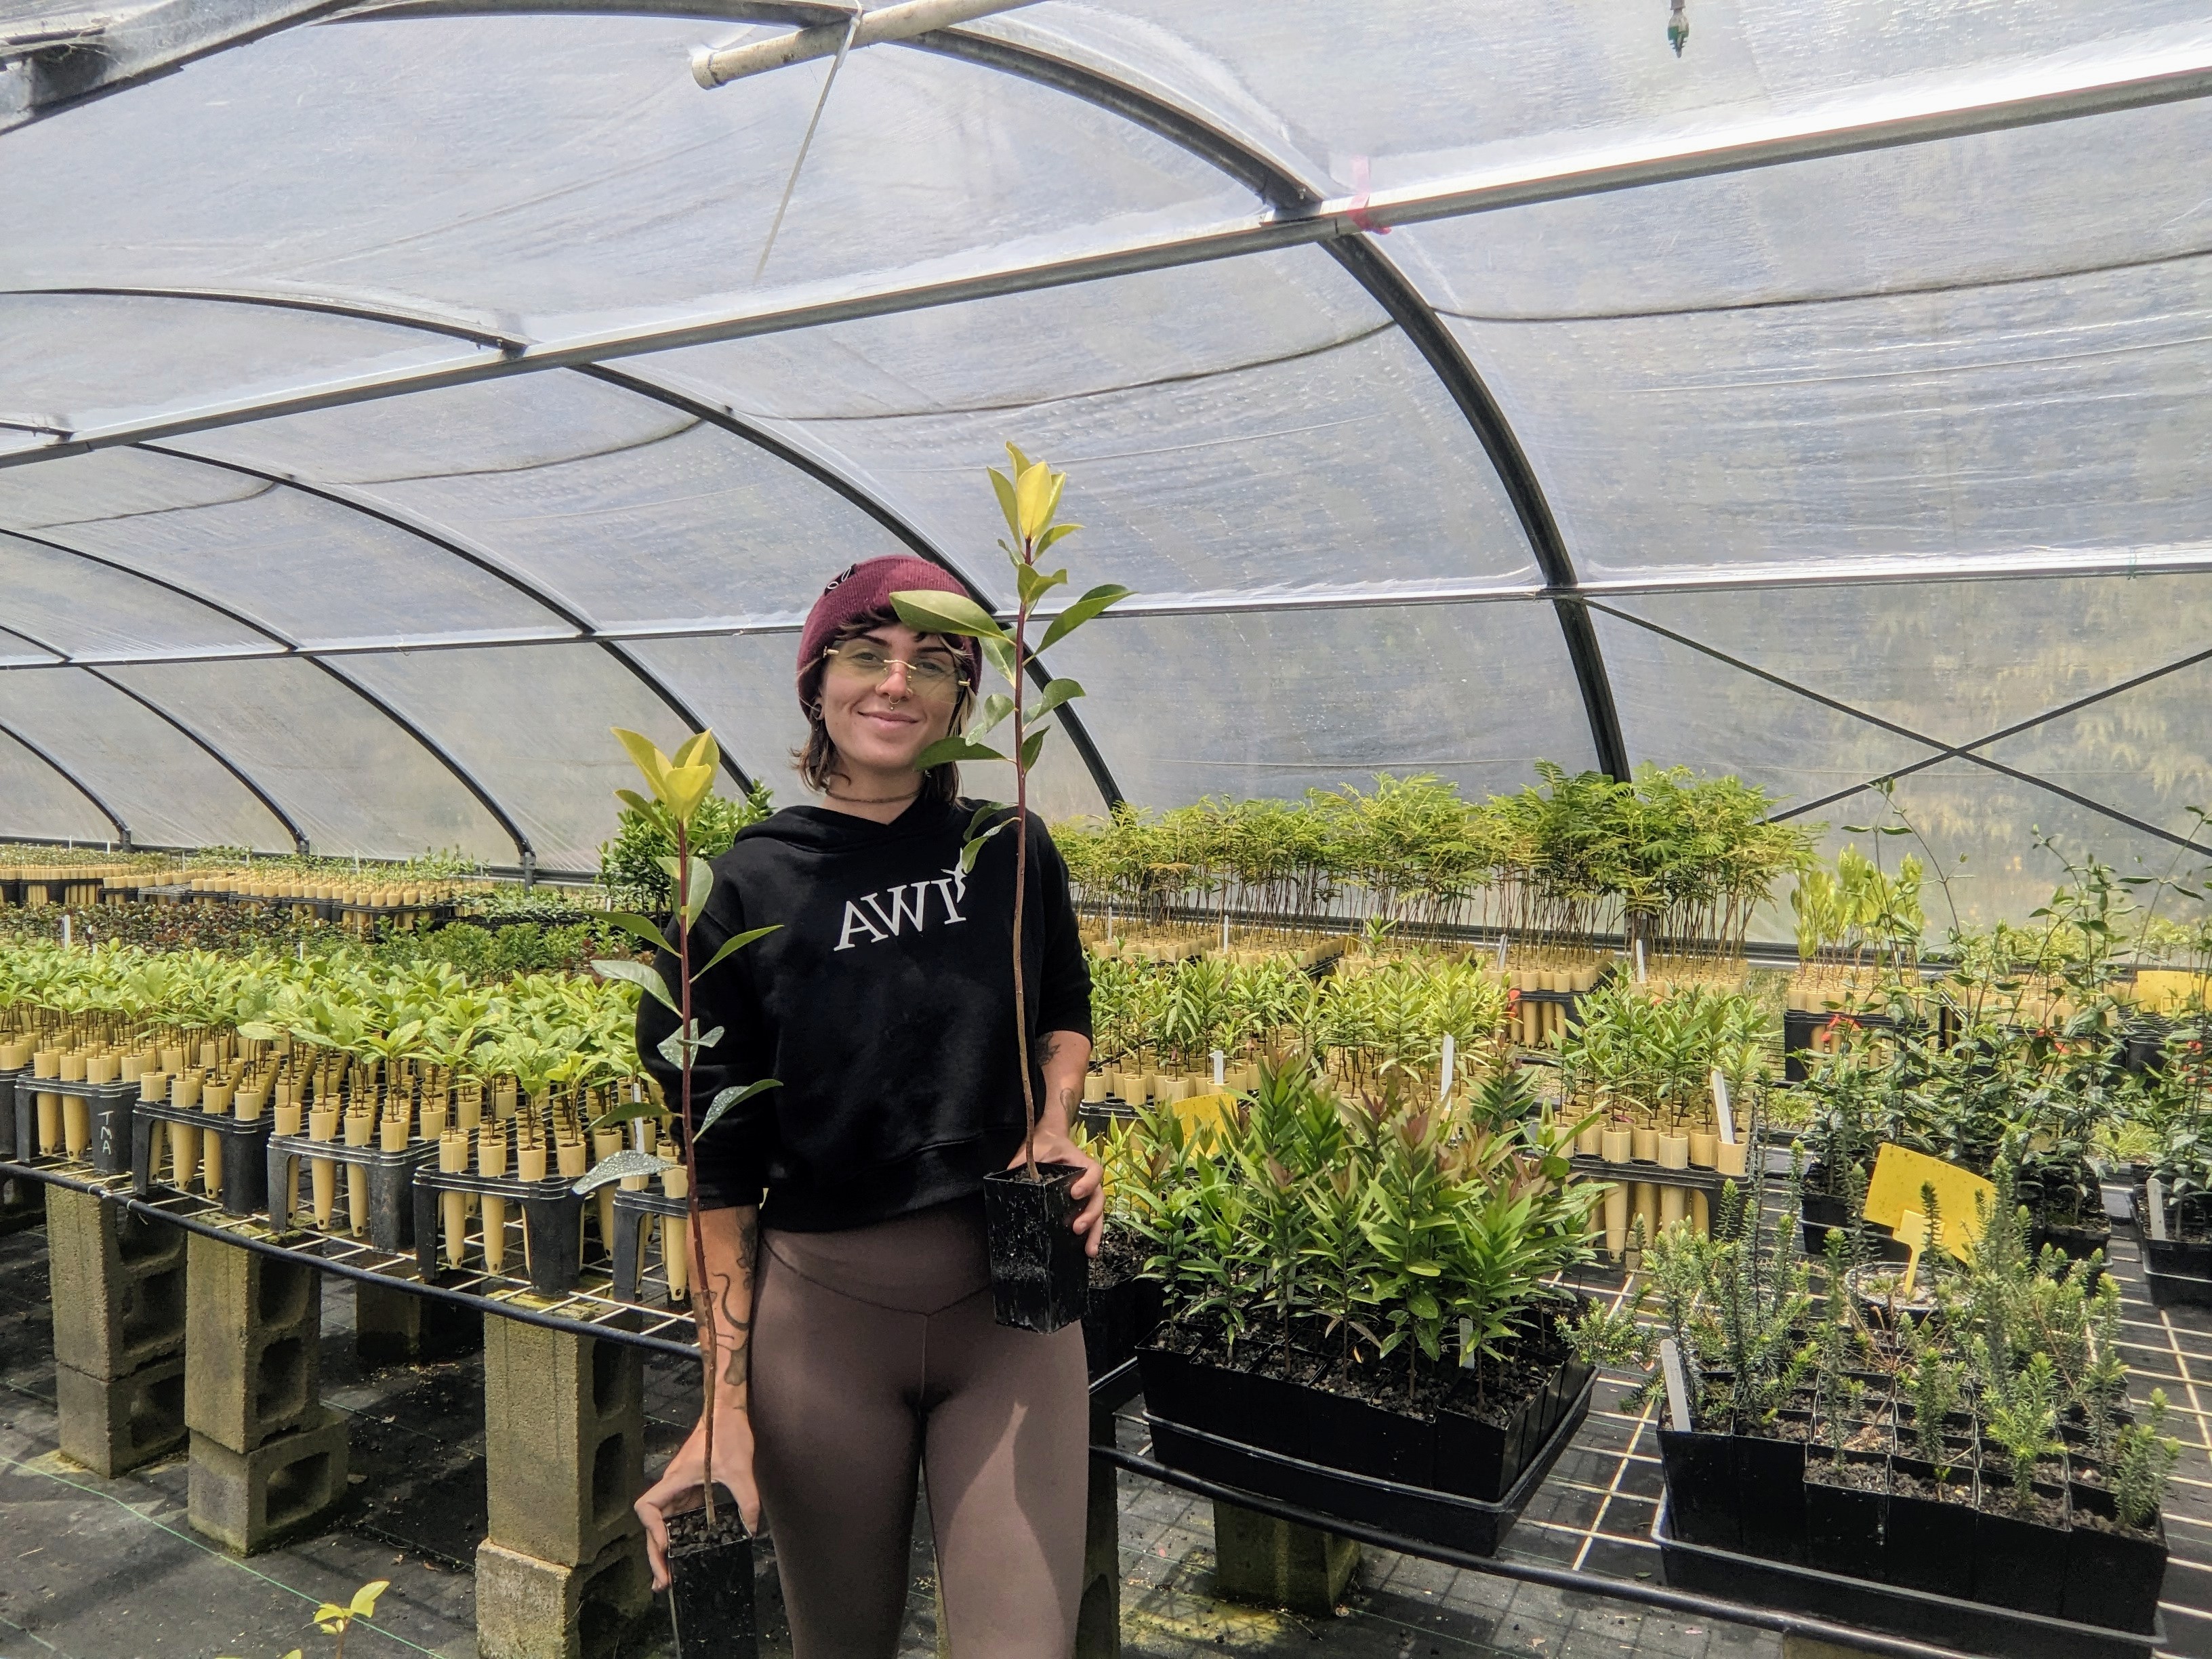 Hanna standing in a greenhouse surrounded by seedlings